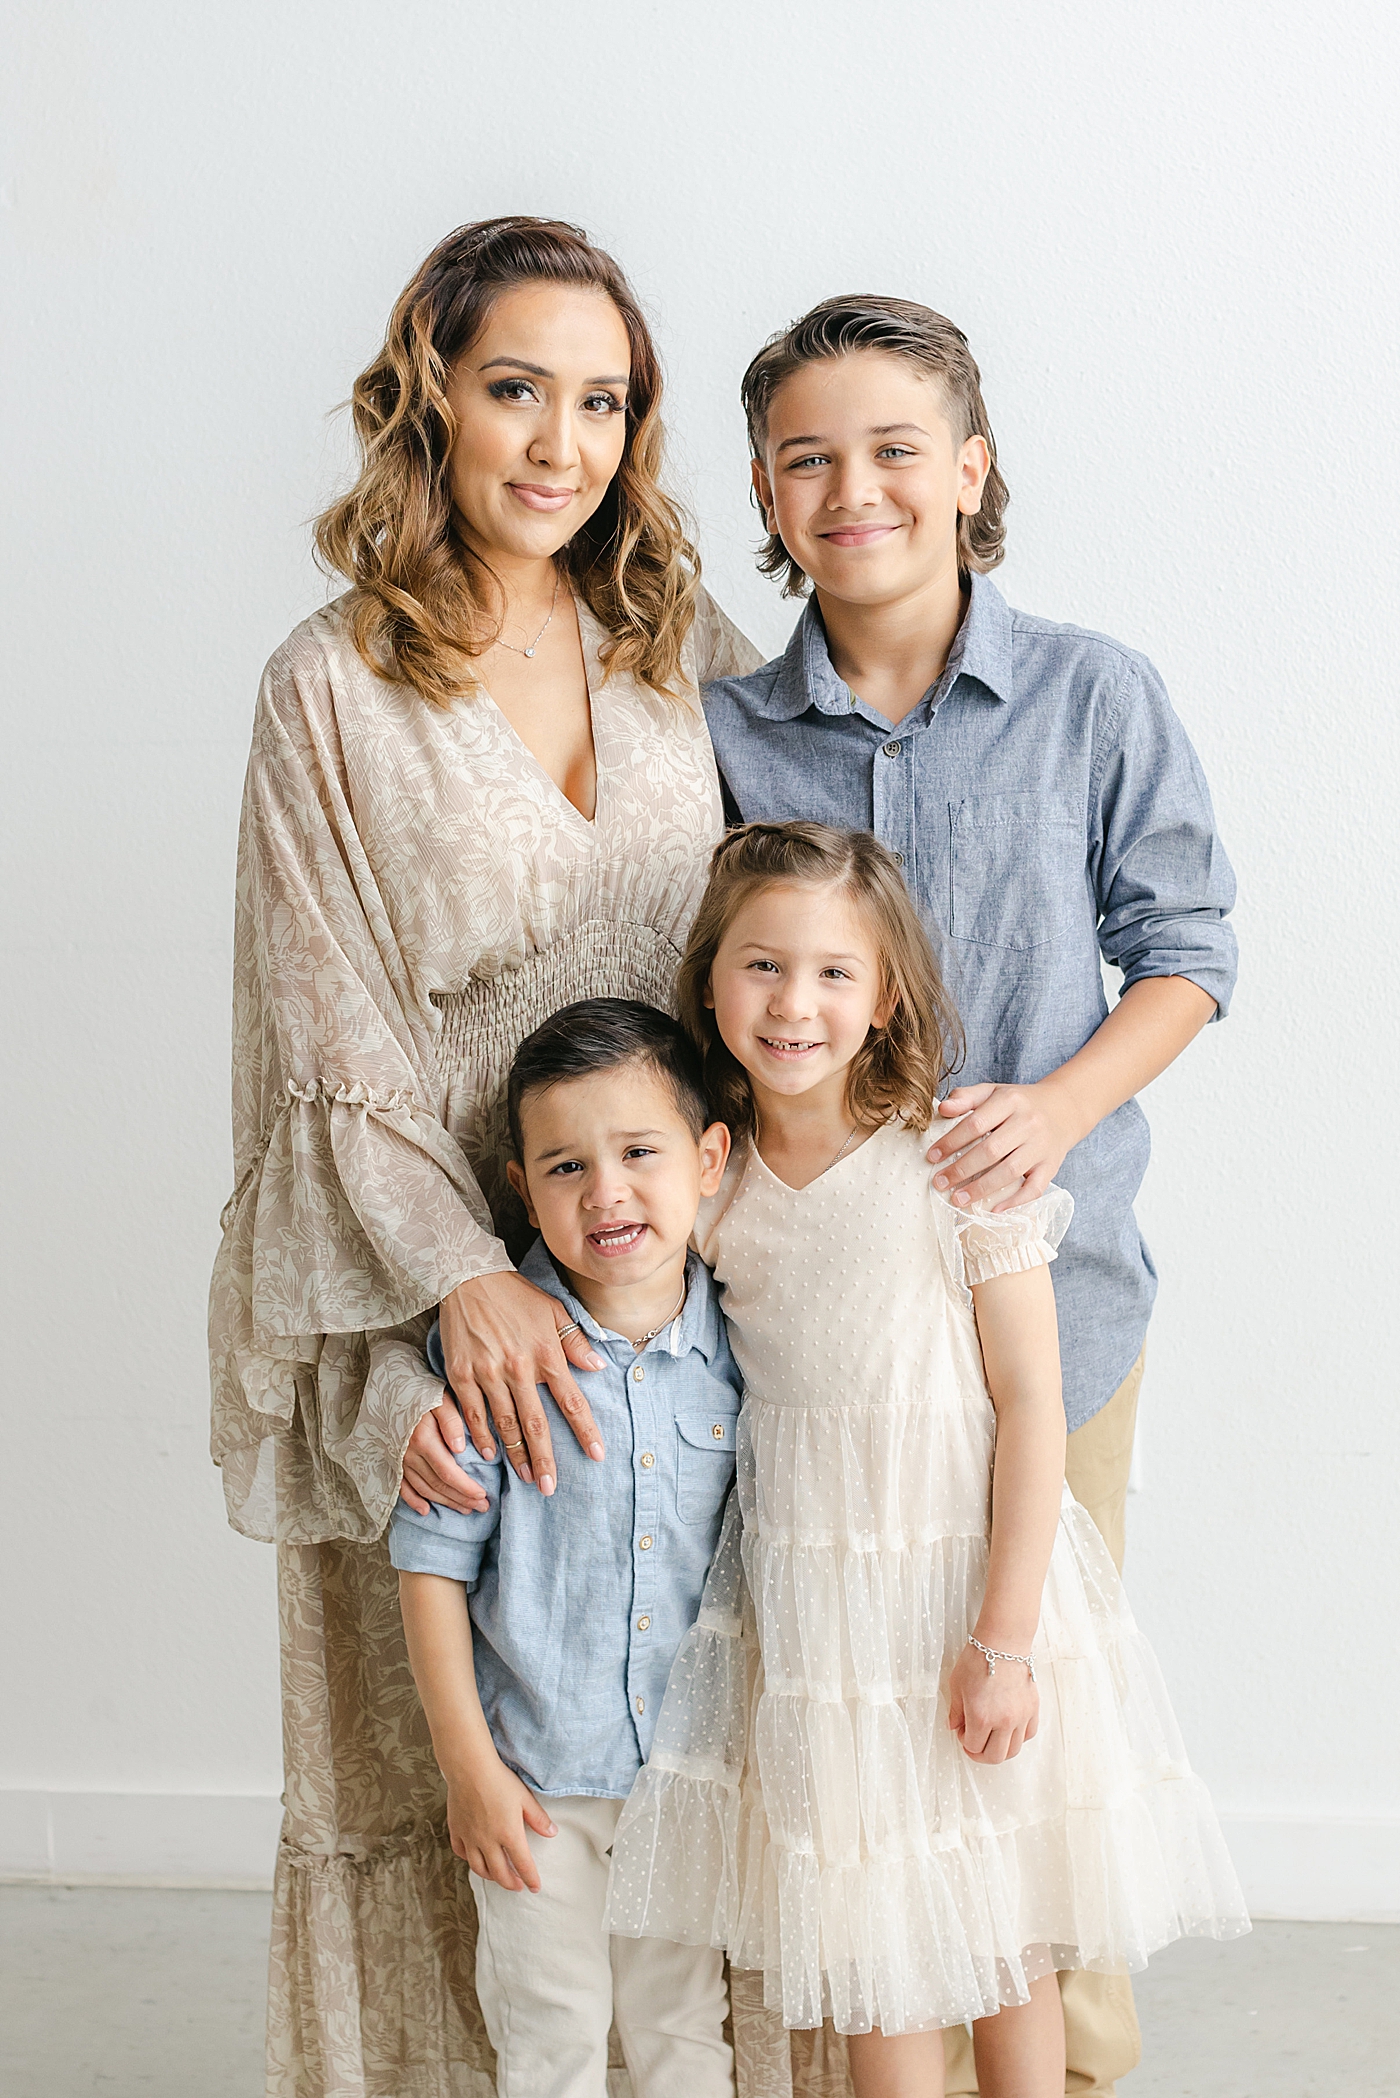 Mom snuggling with her kids during their Studio Family Session in Austin | Photo by Sana Ahmed Photography